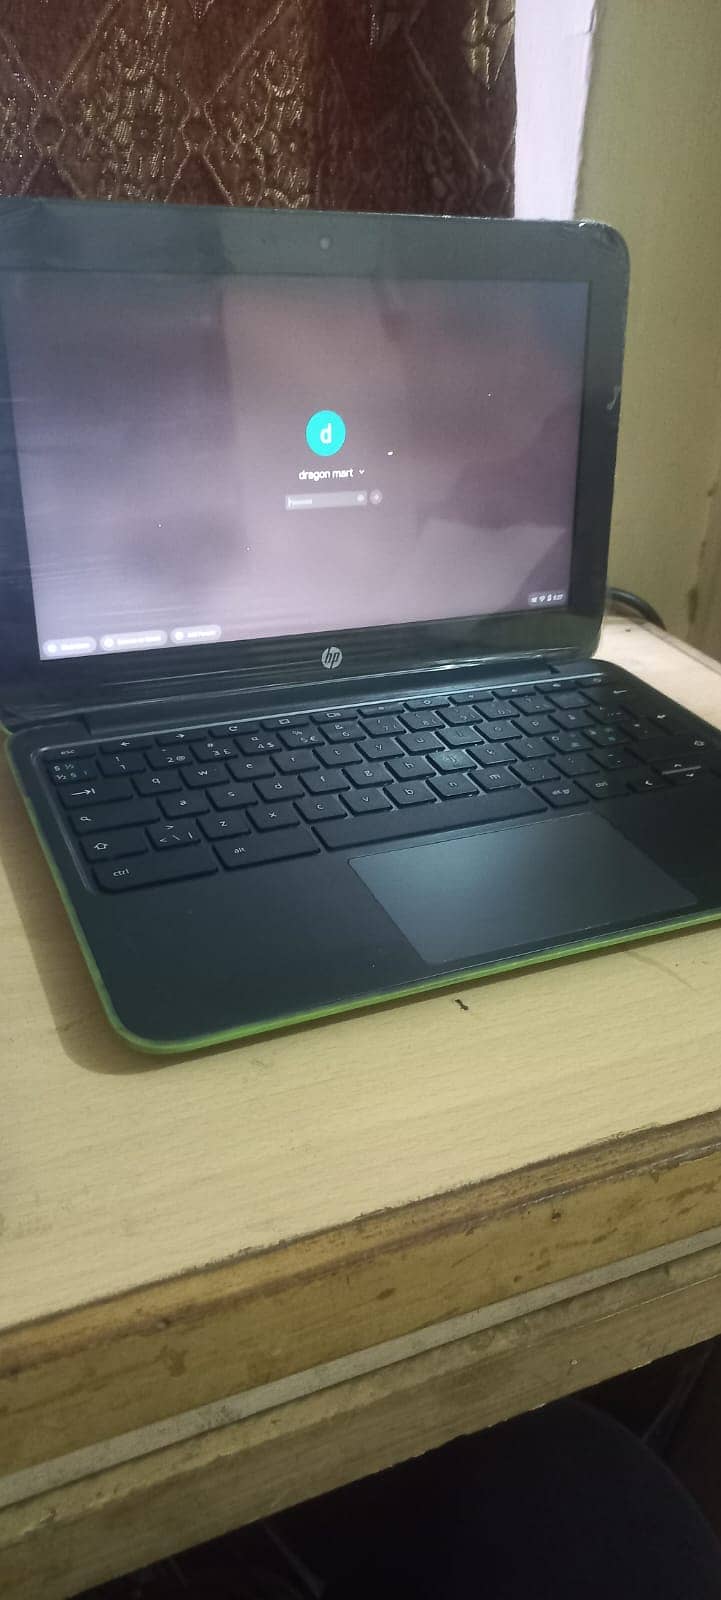 HP CHROMEBOOK G4 SERIES IN GREEN COLOR 2